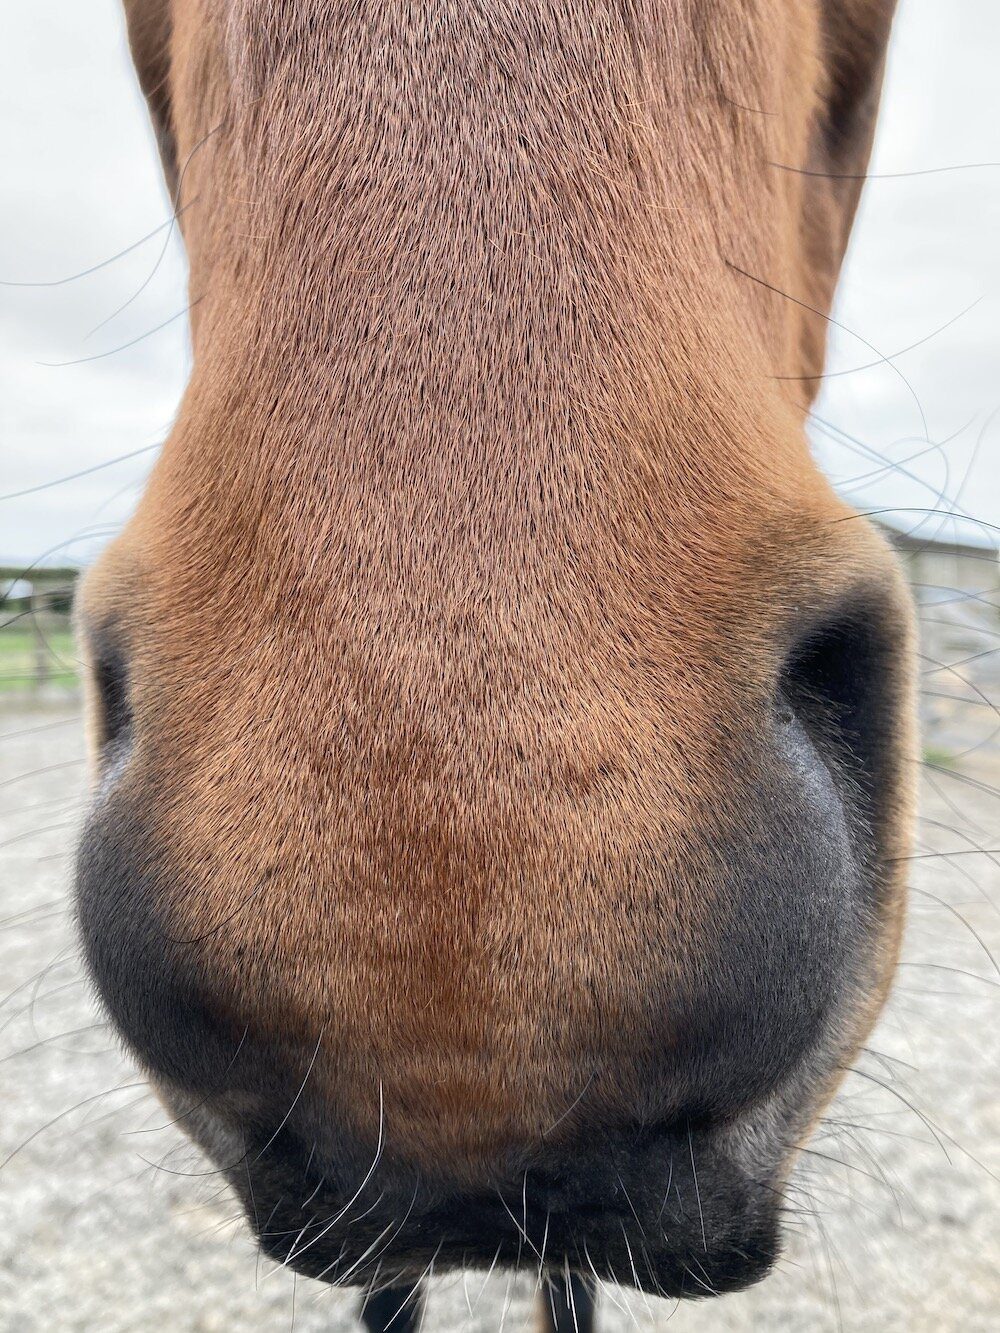 &#8220;Why do horses &#8216;smile&#8217;, or something about a horse&#8217;s sense of smell&#8221;